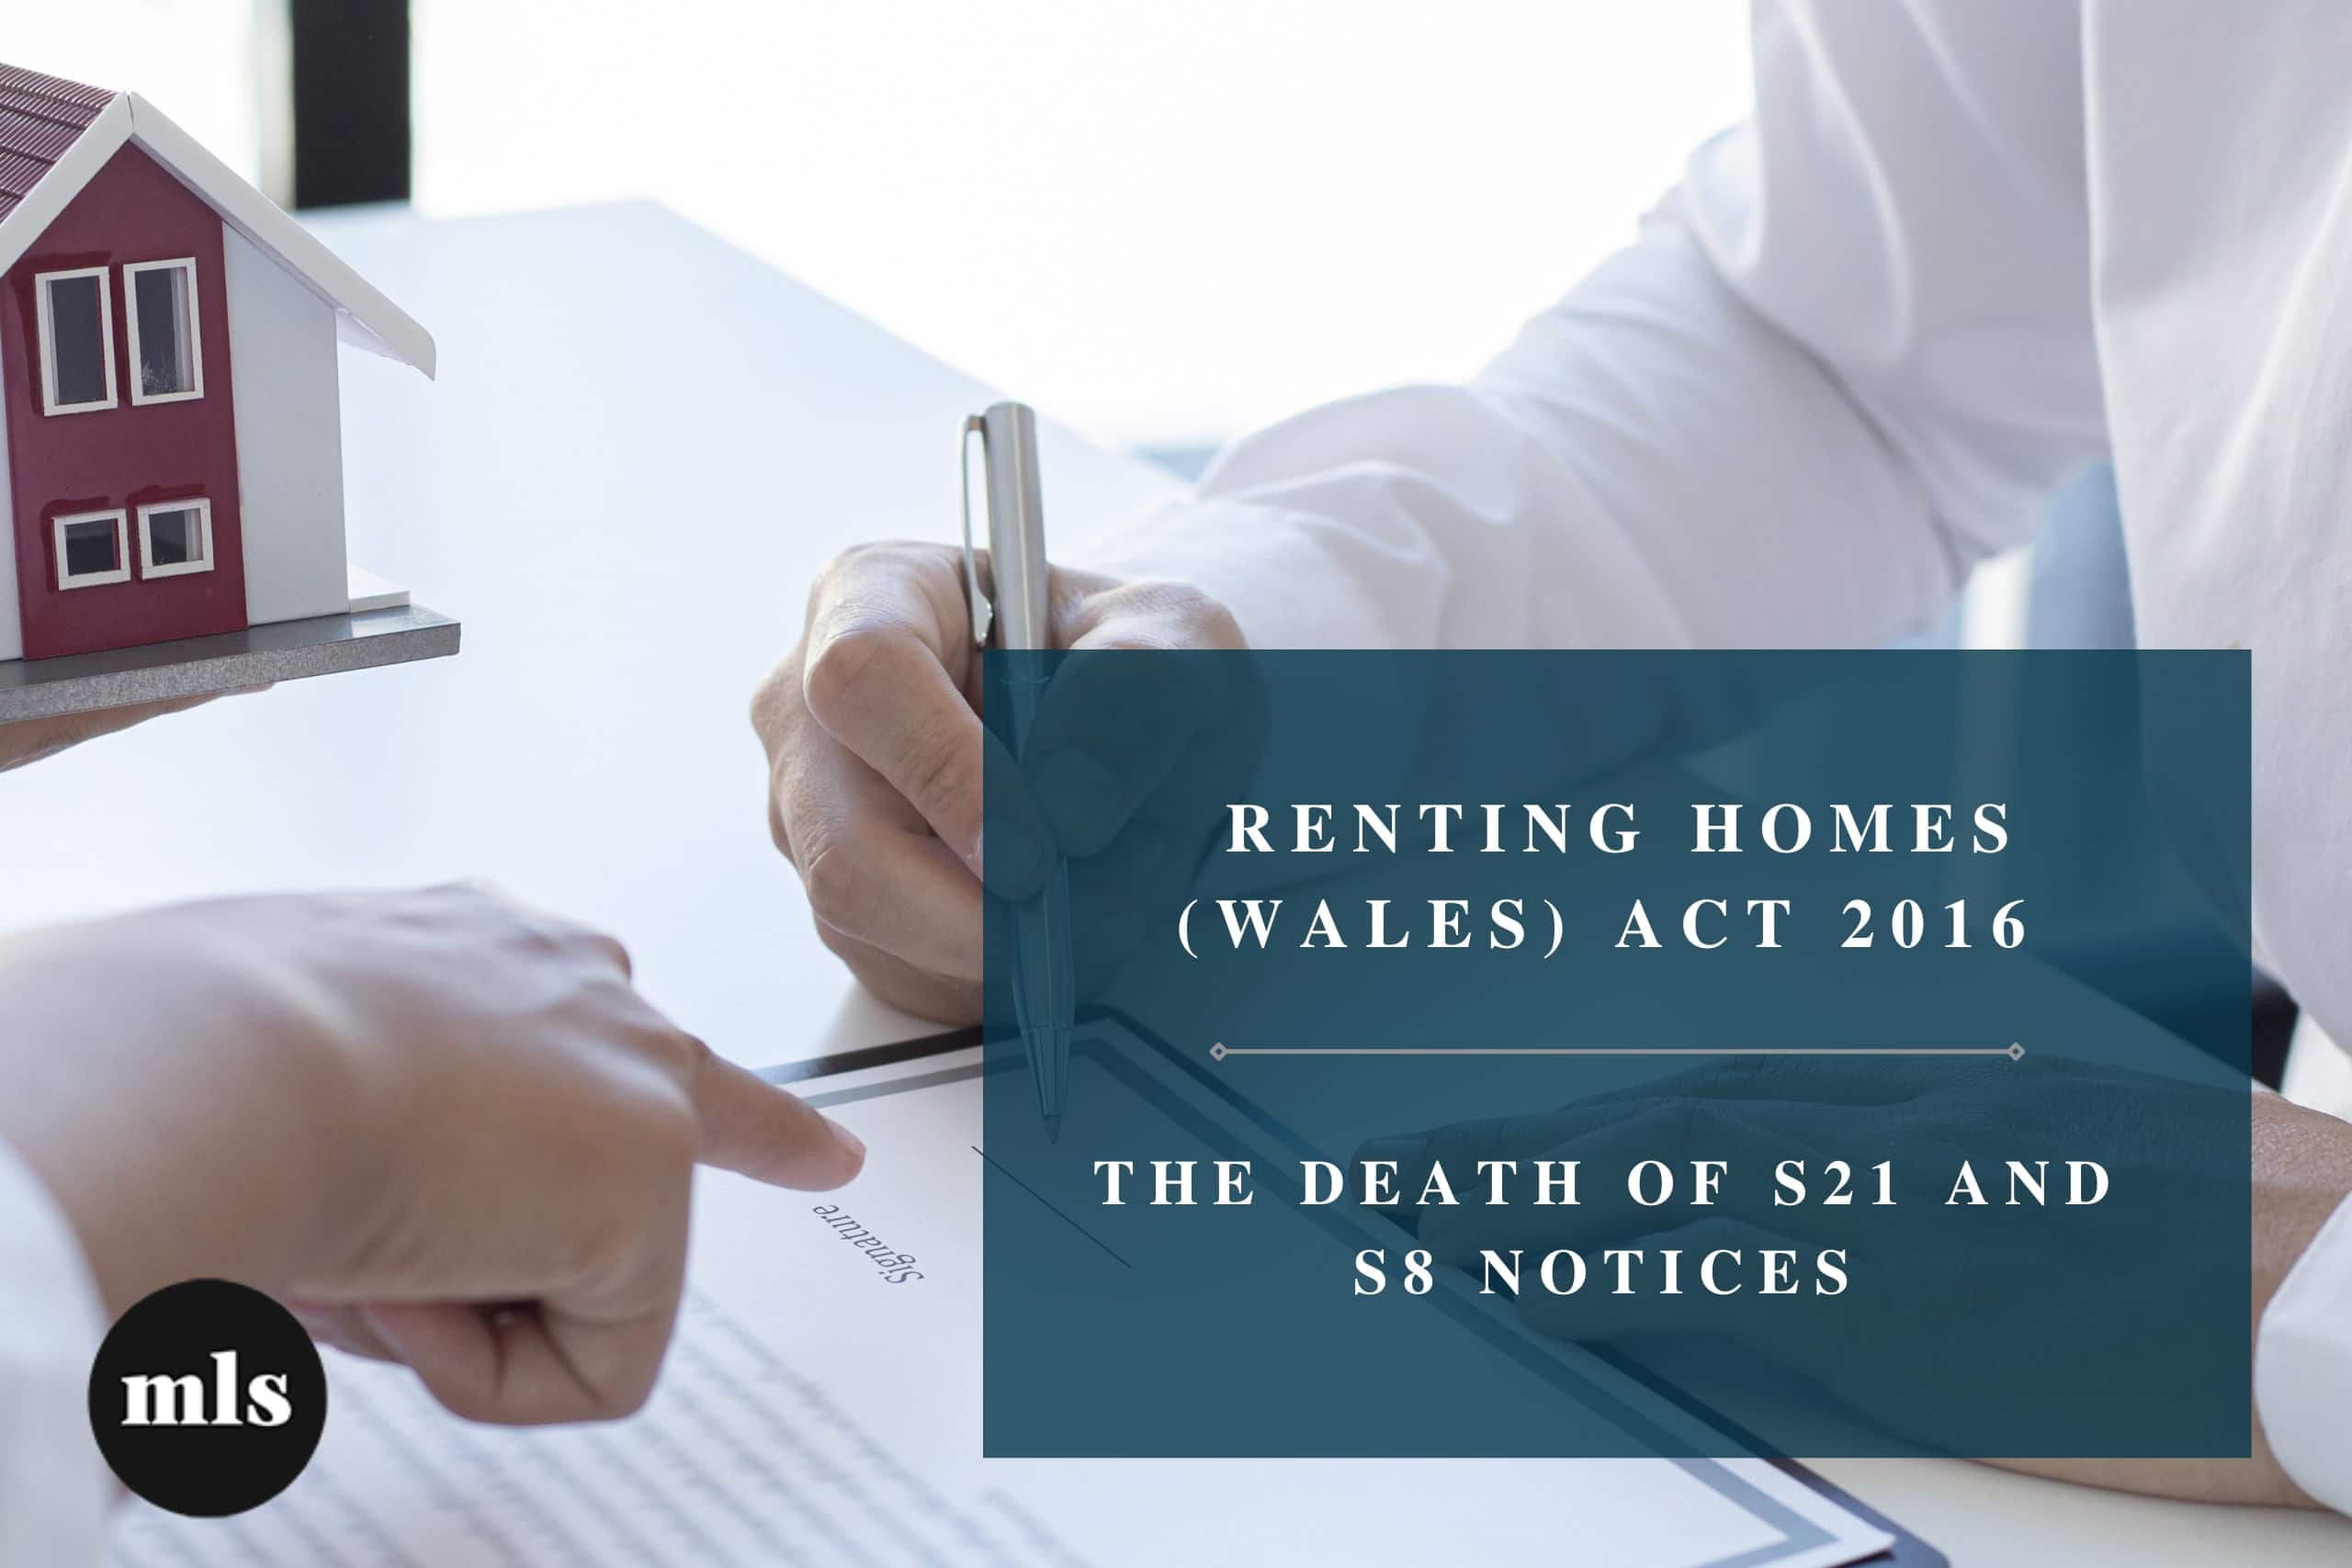 RENTING HOMES (WALES) ACT 2016  – The death of S21 and S8 Notices